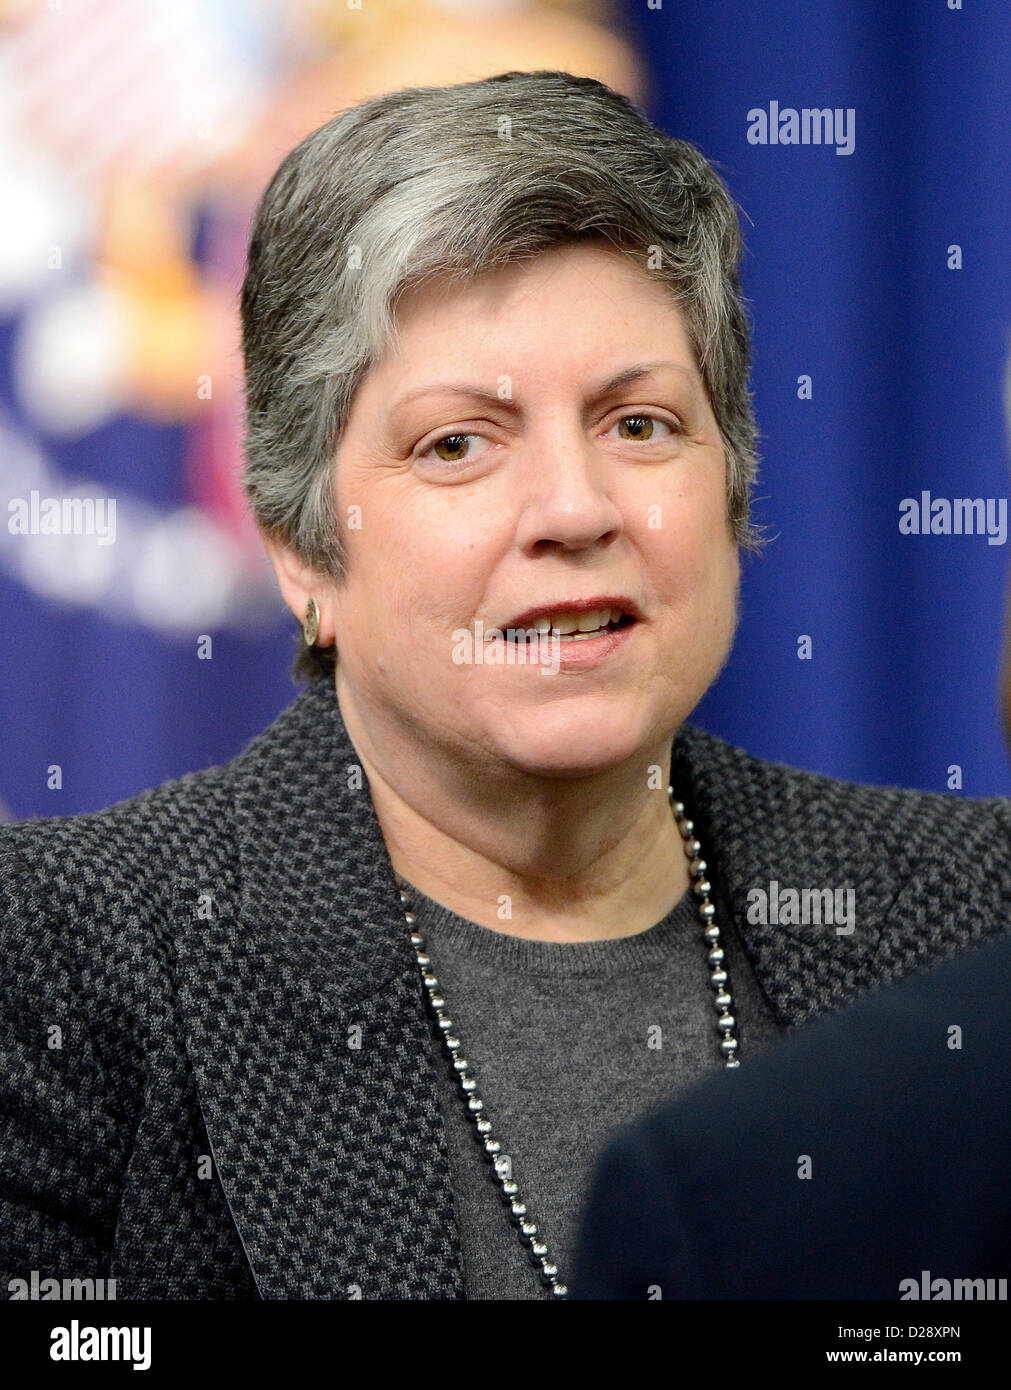 United States Secretary Of Homeland Security Janet Napolitano attends the remarks of U.S. President Barack Obama and Vice President Joe Biden at an event at the White House in Washington, D.C. to unveil a set of proposals to reduce gun violence on Wednesday, January 16, 2012. .Credit: Ron Sachs / CNP Stock Photo